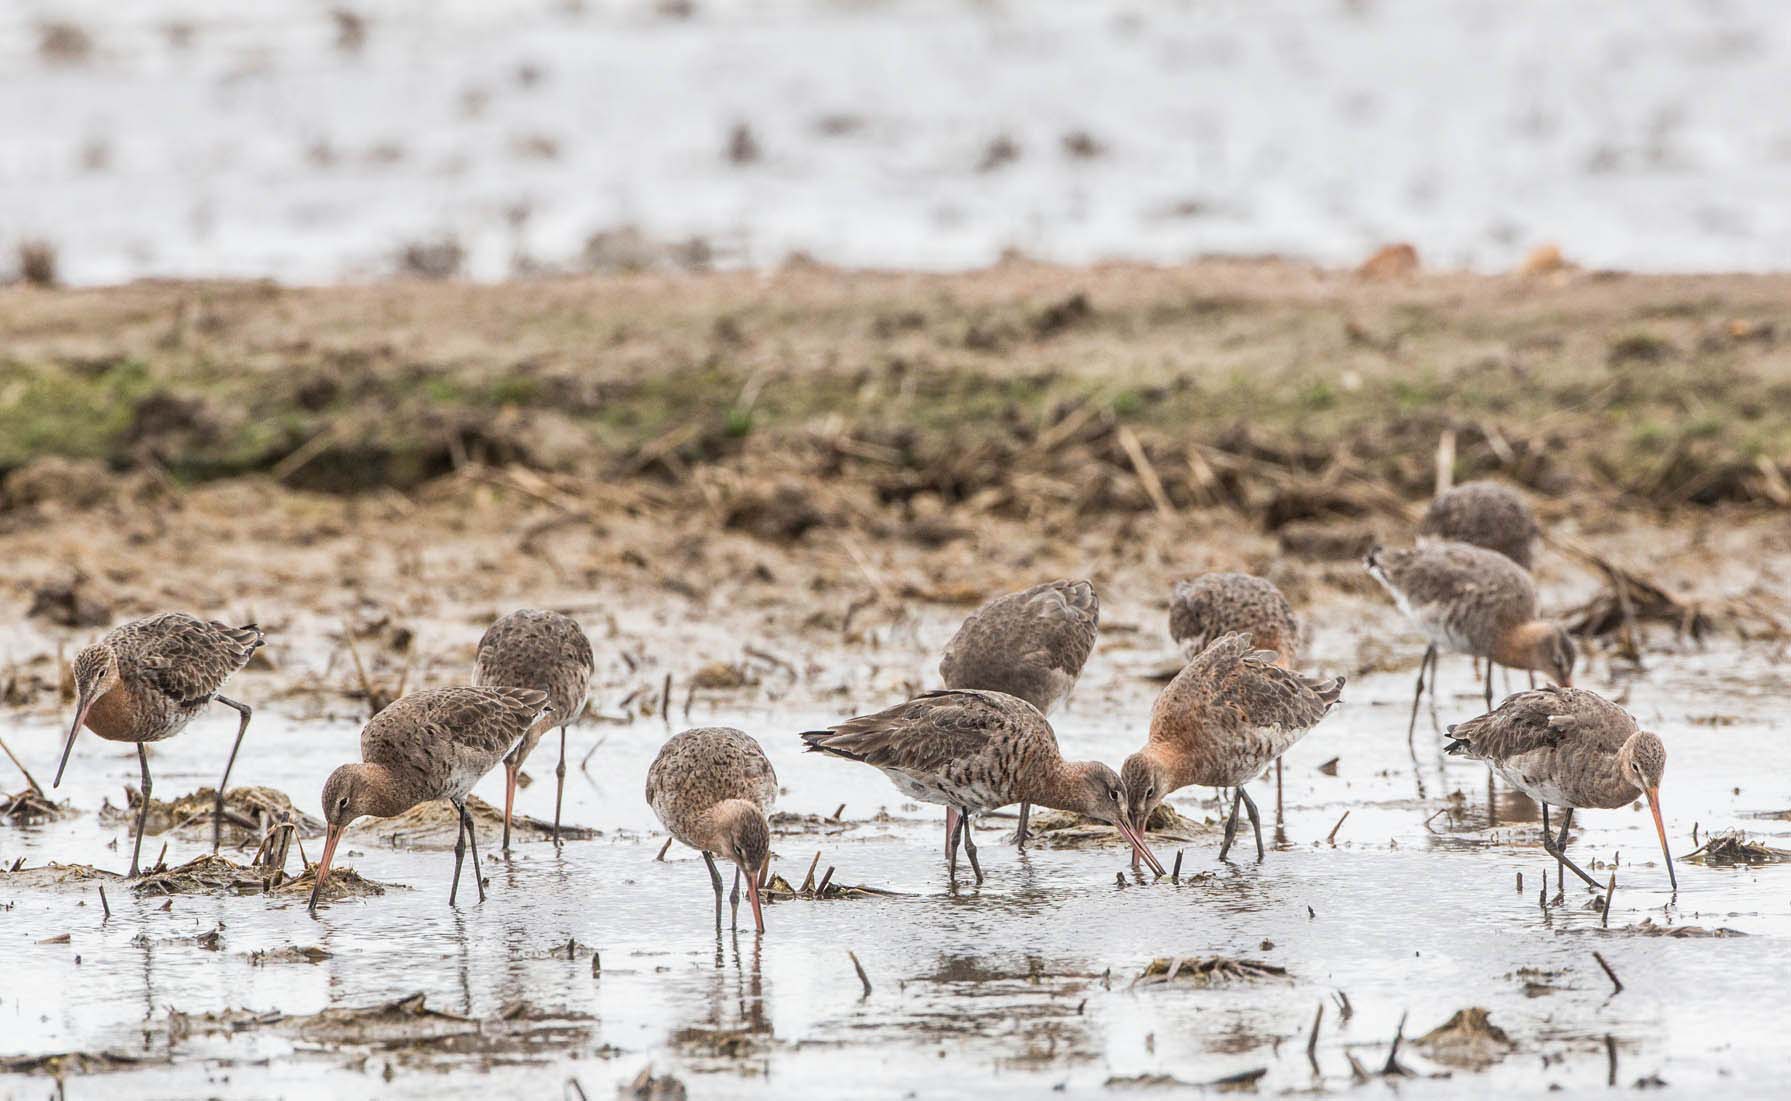 Photo: A flock of black-tailed godwits (Limosa limosa limosa) foraging in a rice field in Extremadura, Spain. Credit: Jan van de Kam